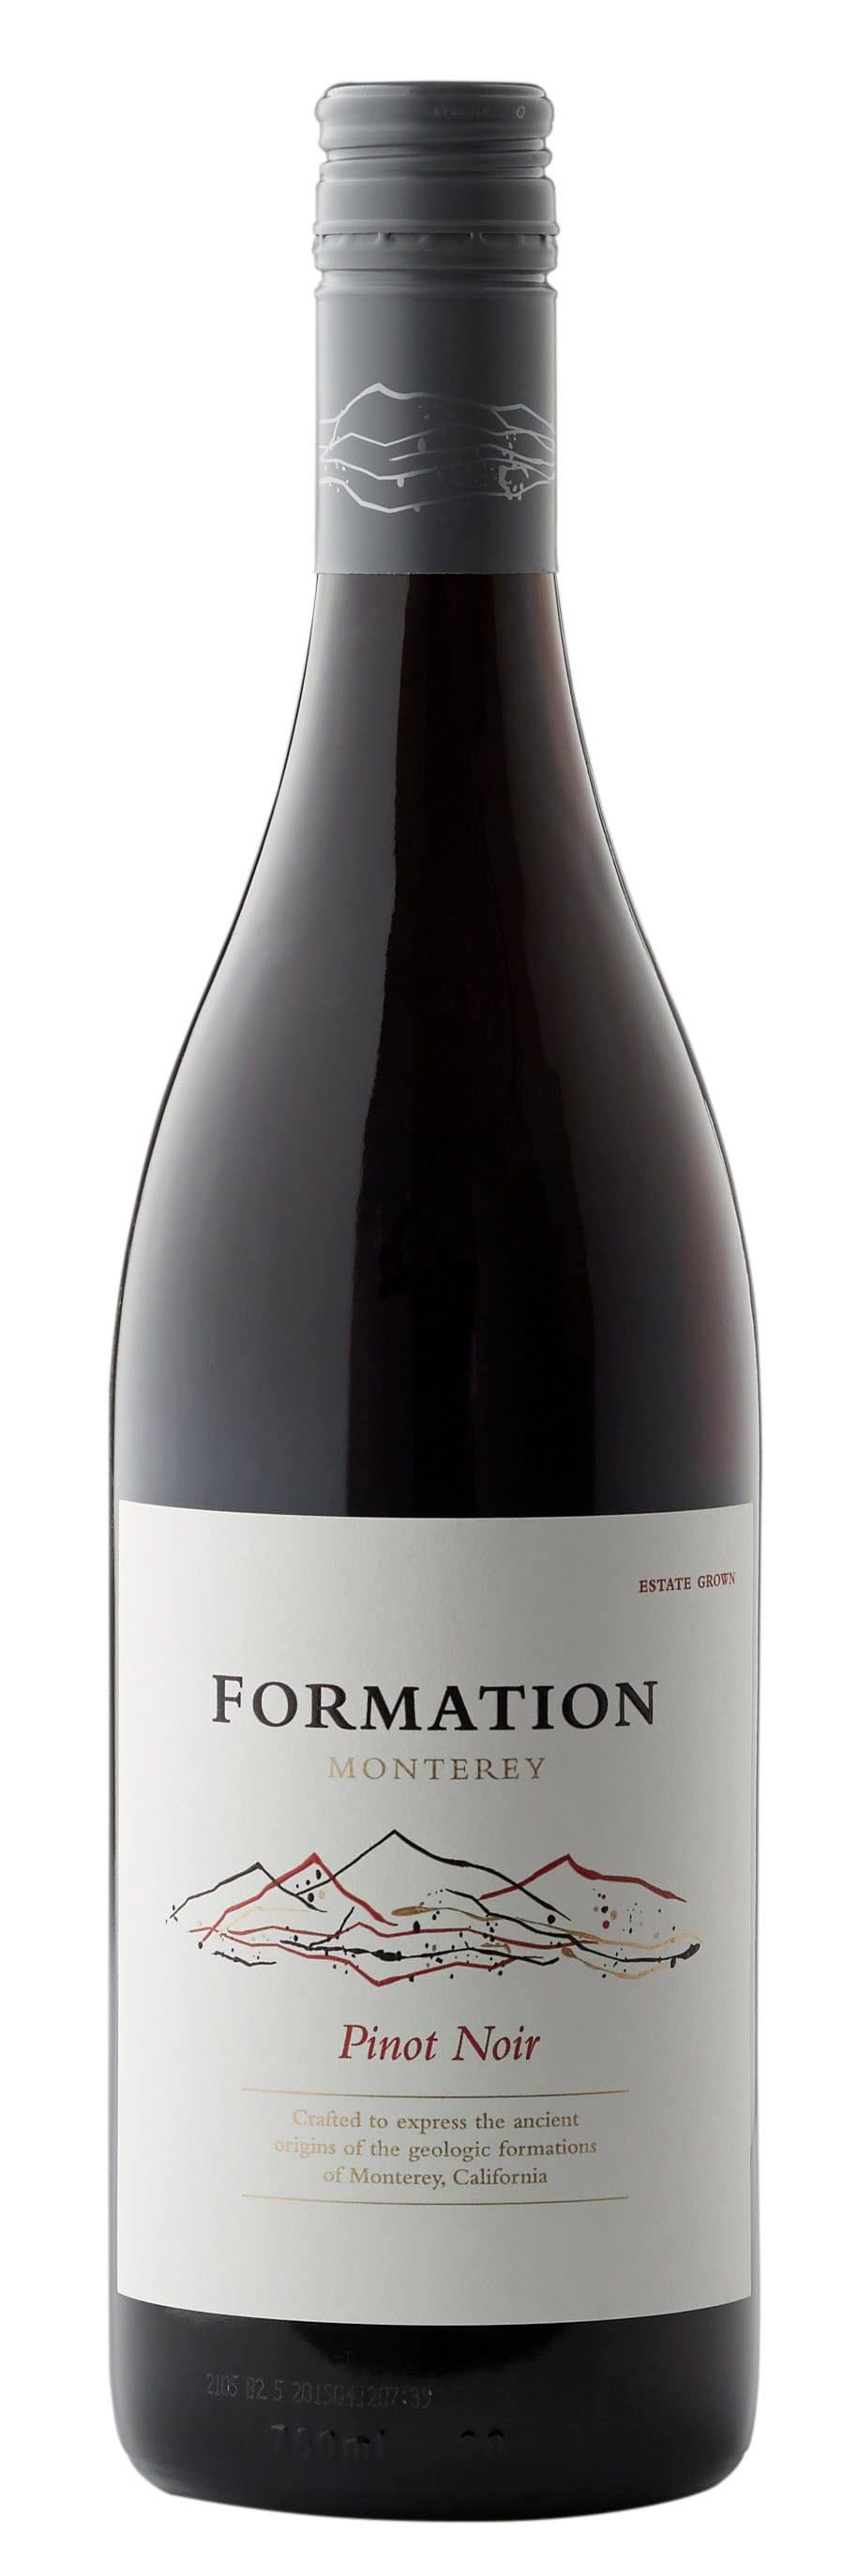 Formation Pinot Noir 2013 Red Wine from California - 750ml